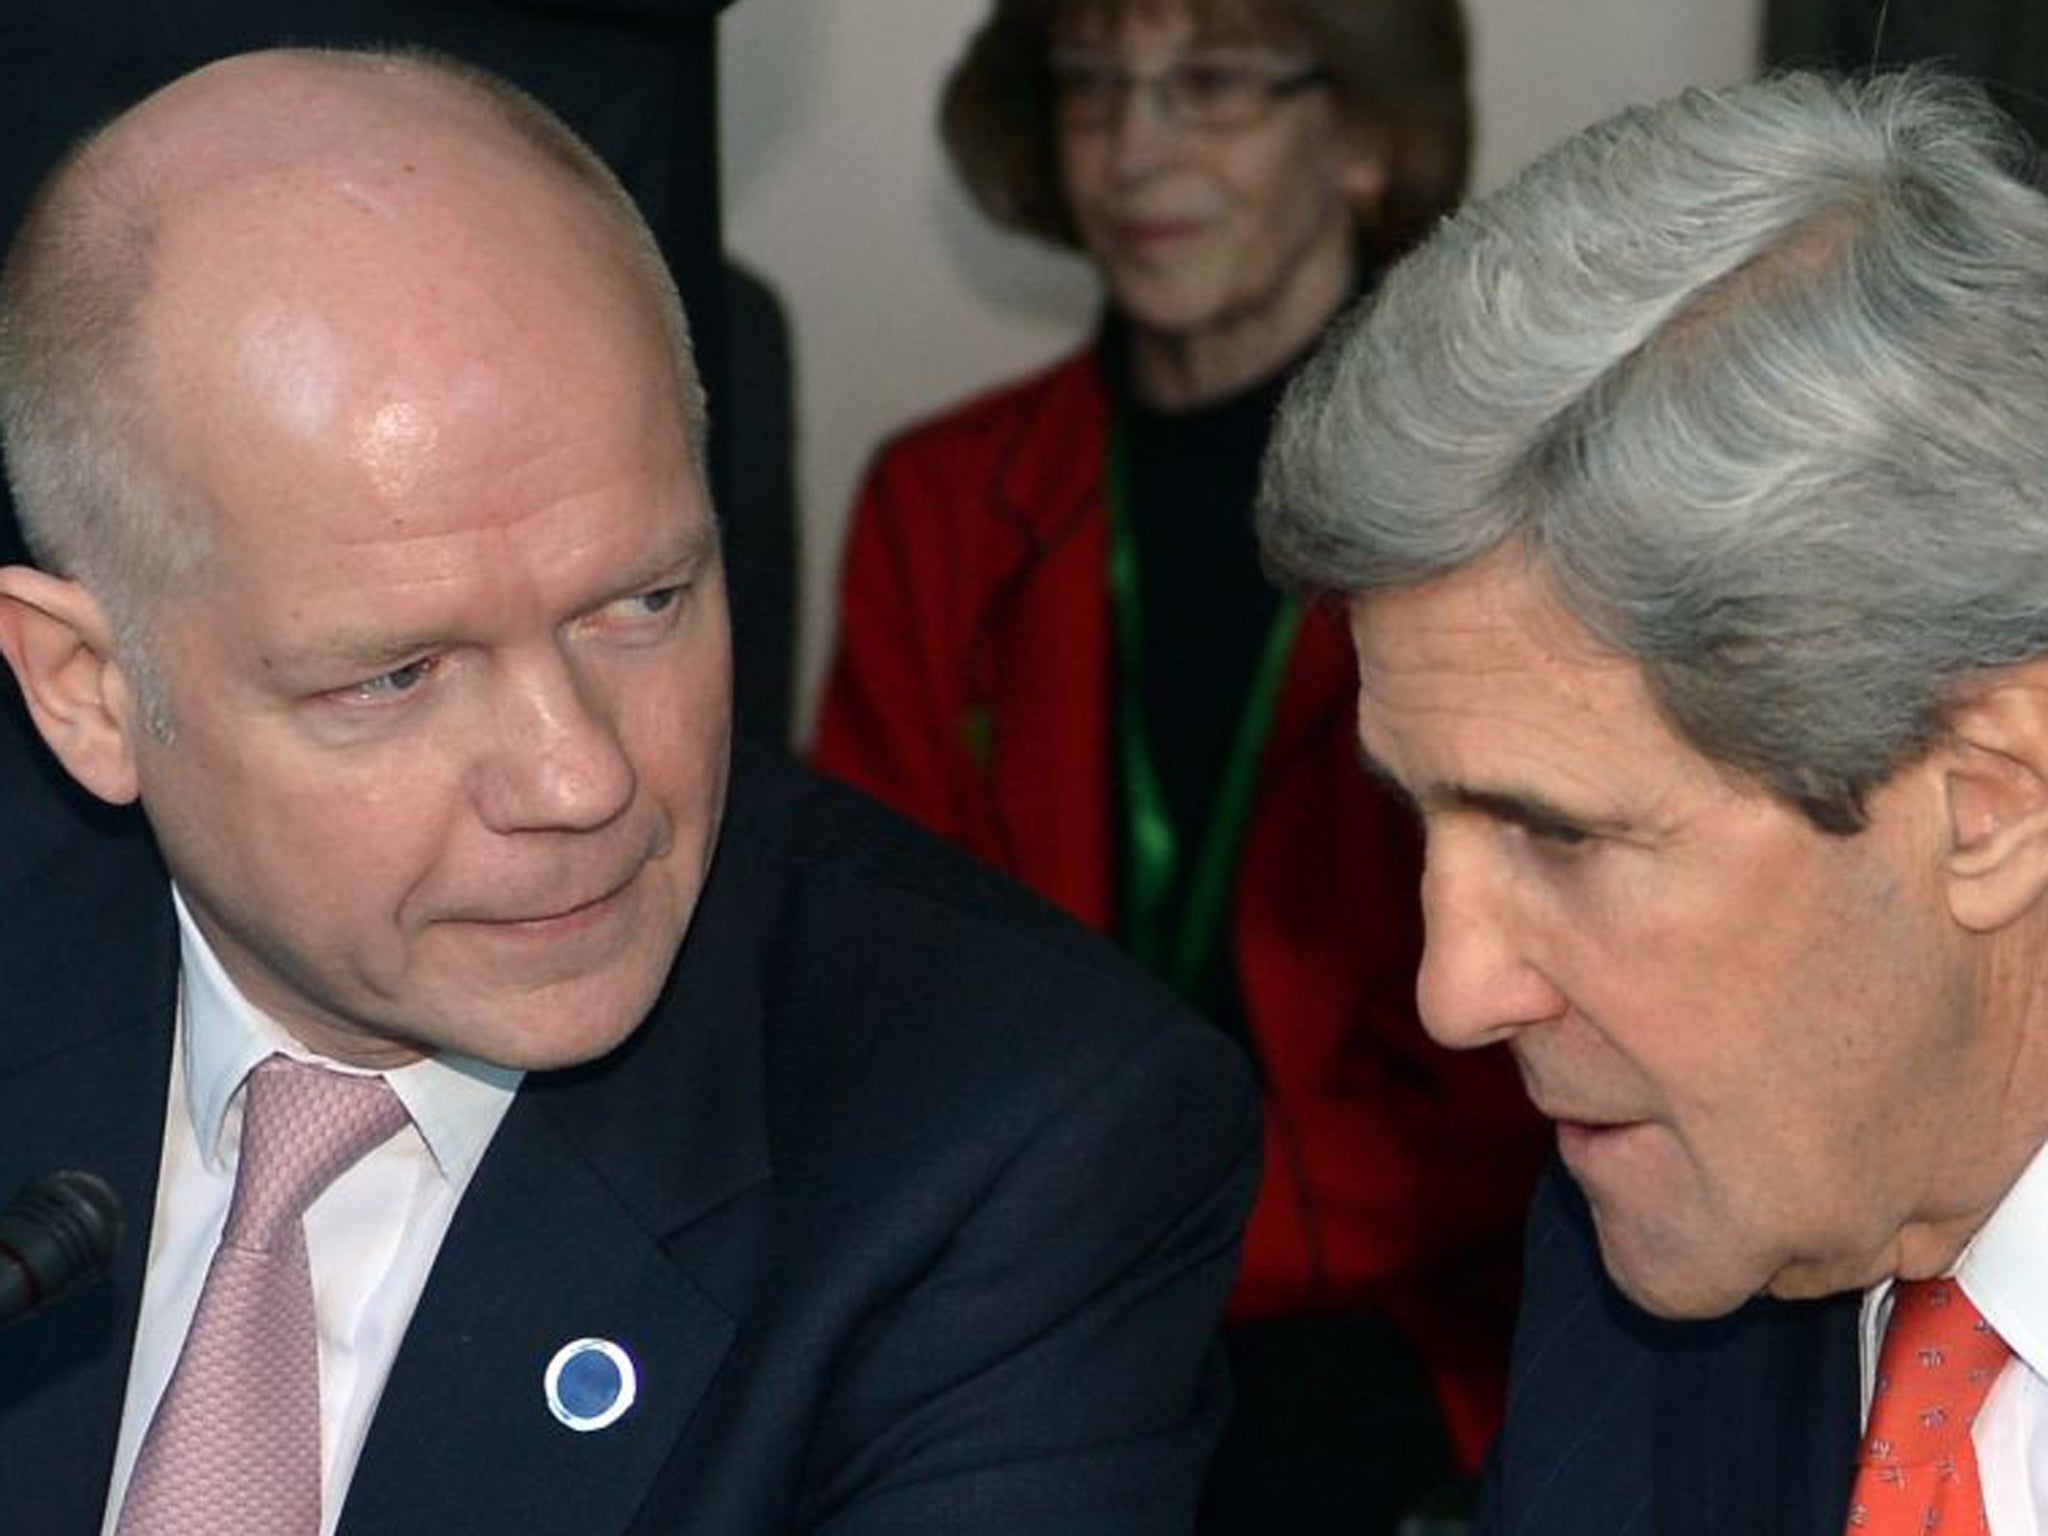 William Hague with John Kerry this morning